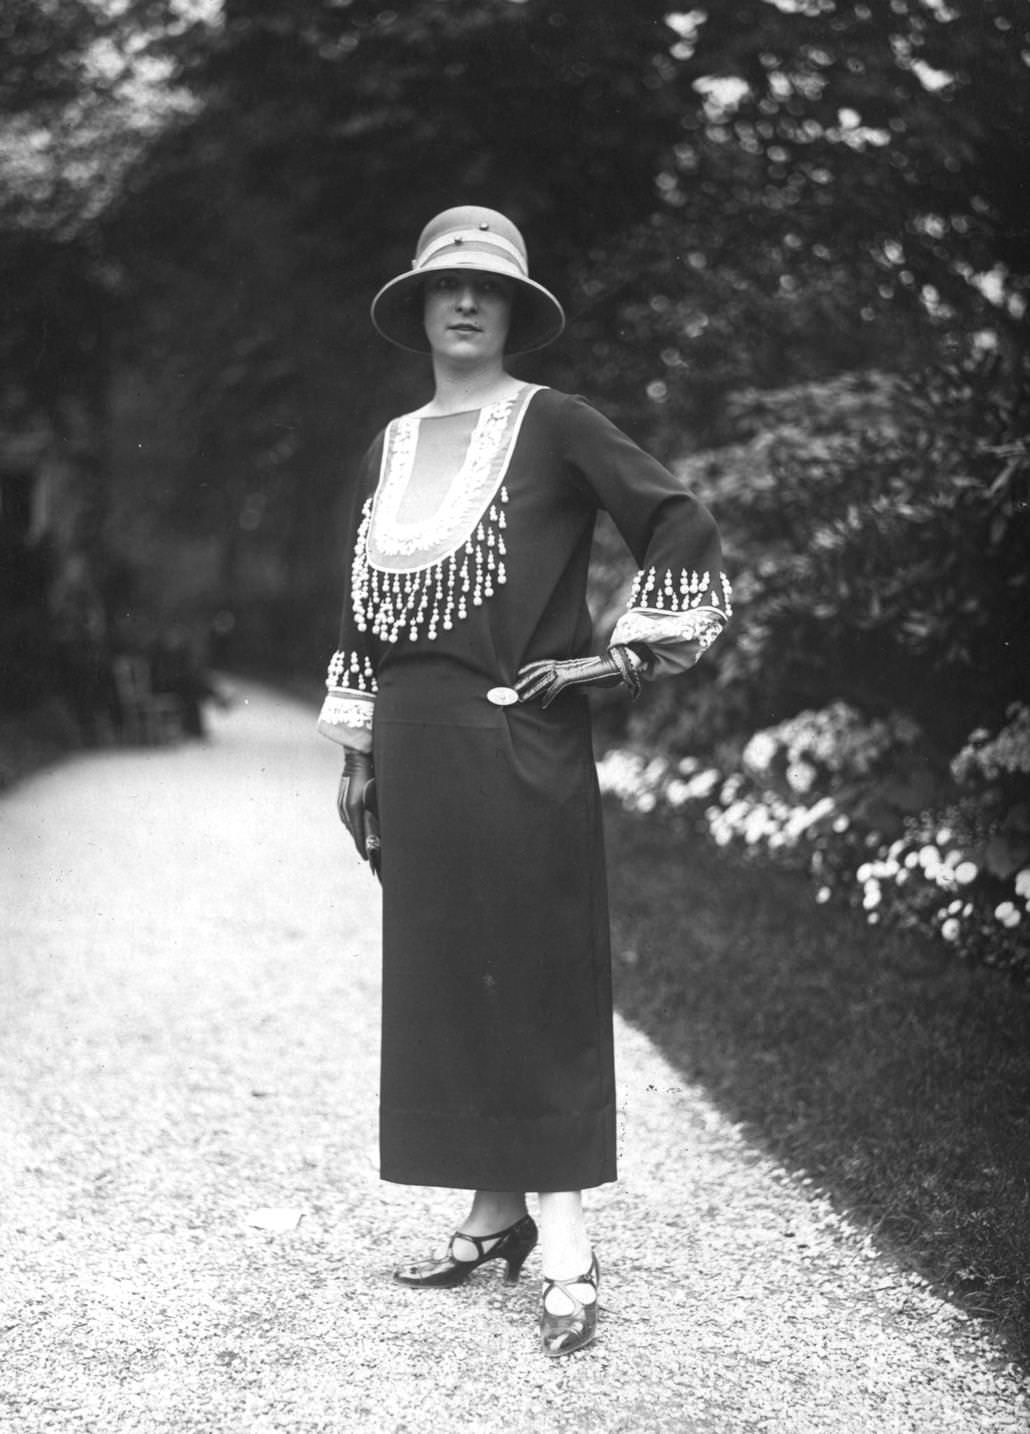 Ankle length dress by the couturier Charles Frederick Worth, decorated with an intricately beaded yoke and cuffs. The model is also wearing leather gloves with a patterned inlay and cloche hat, 1923